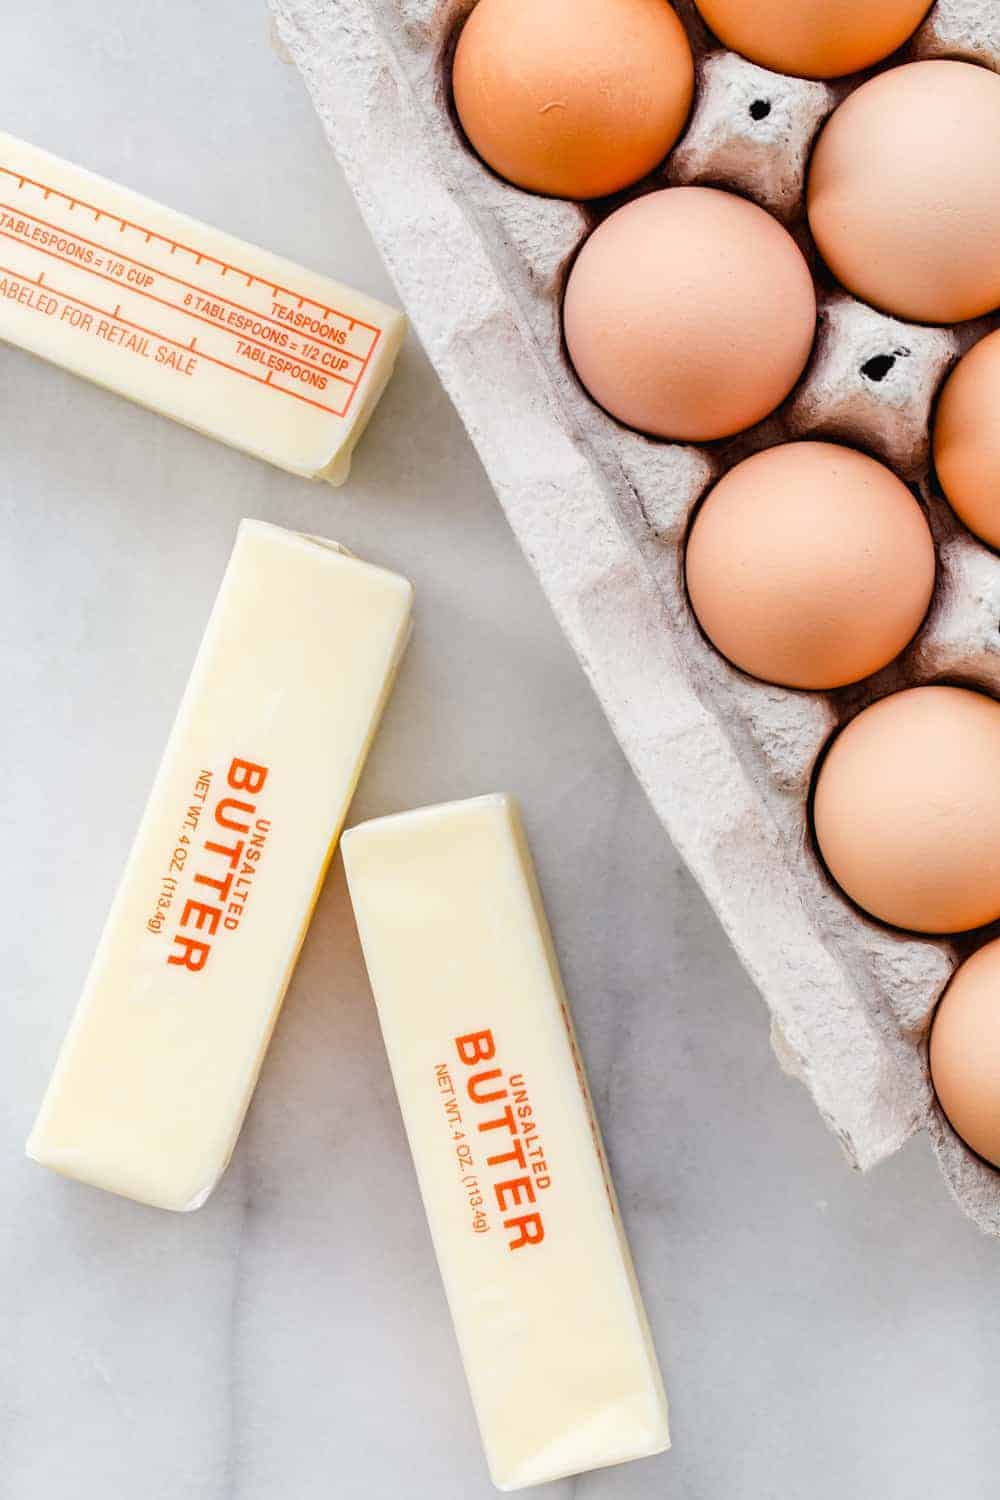 How To Soften Butter